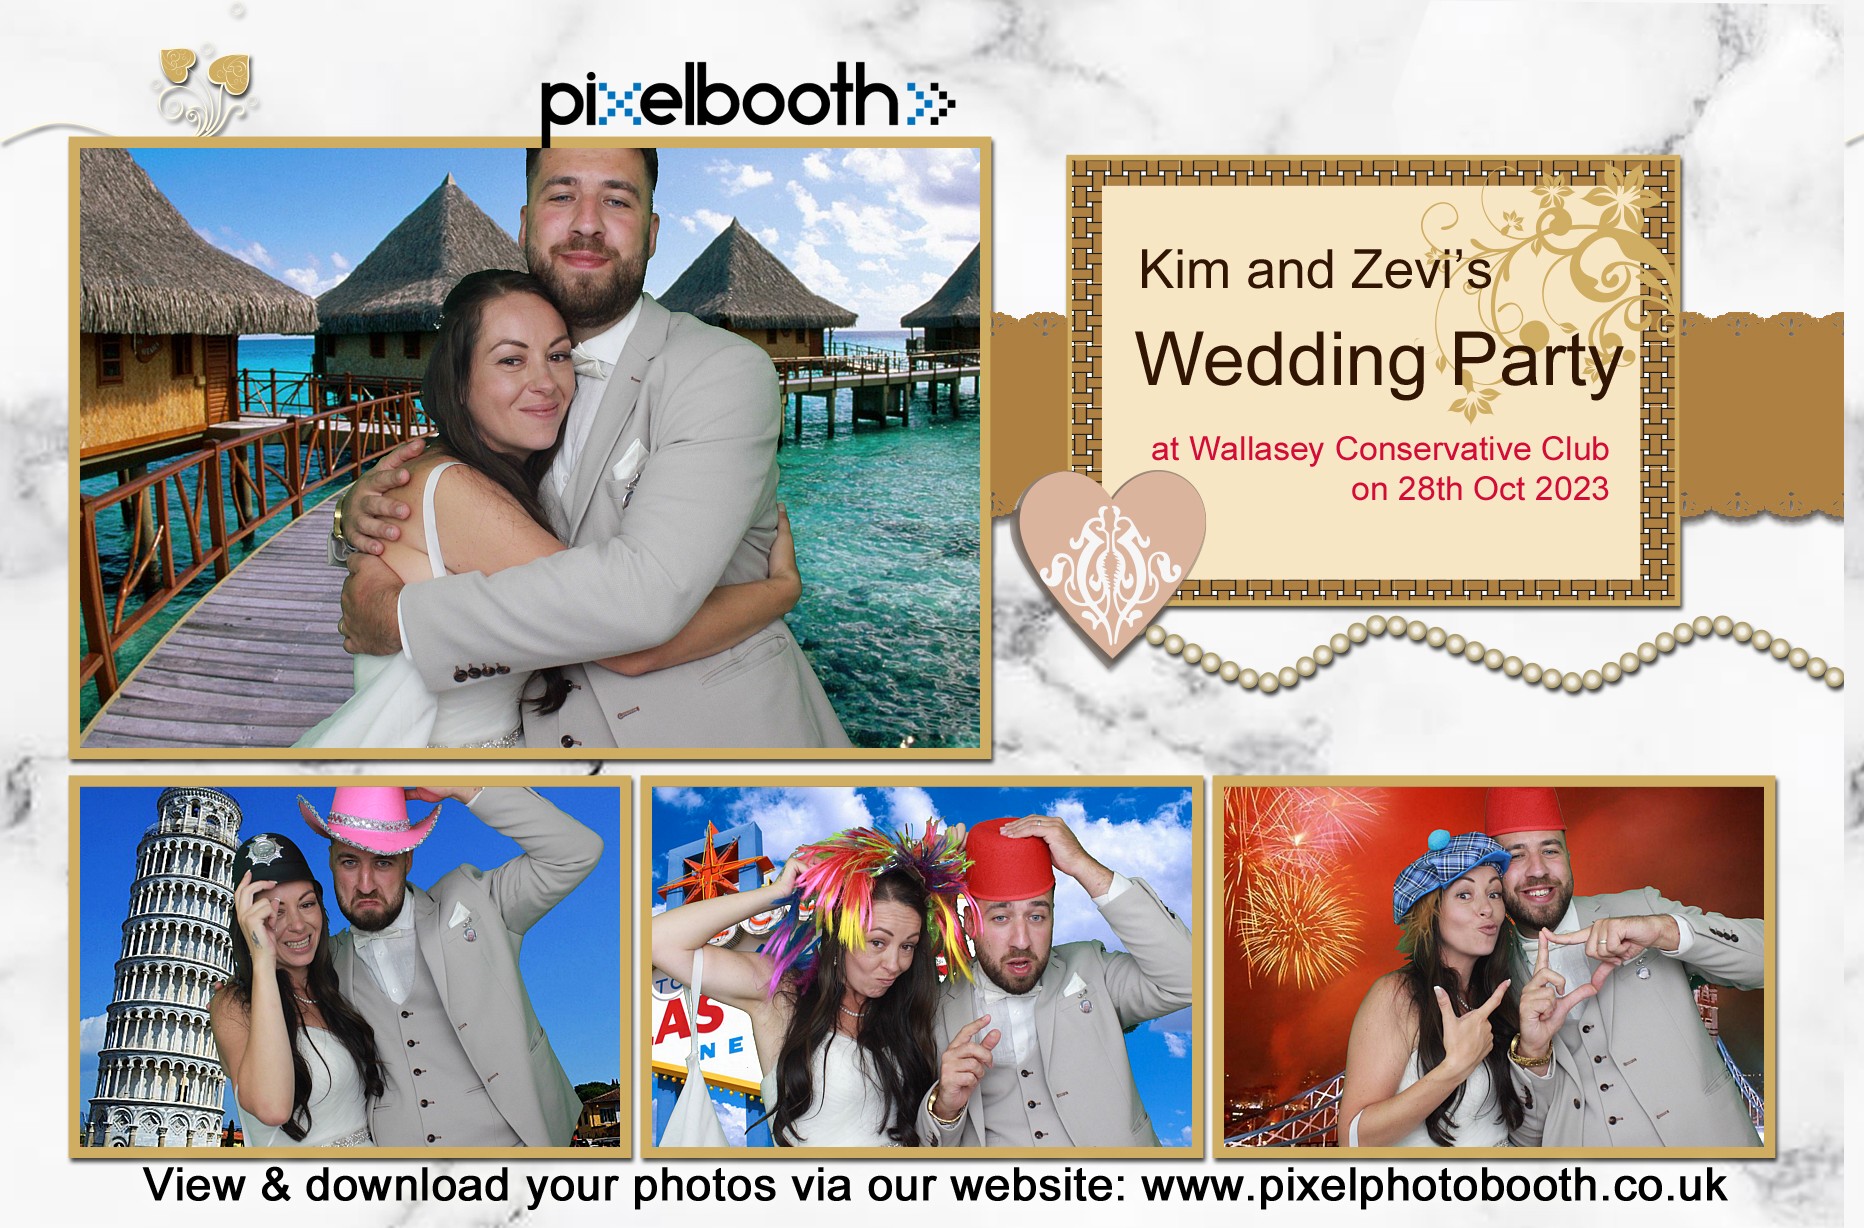 28th Oct 2023: Kim and Zevi's Wedding Party at The Conservative Club